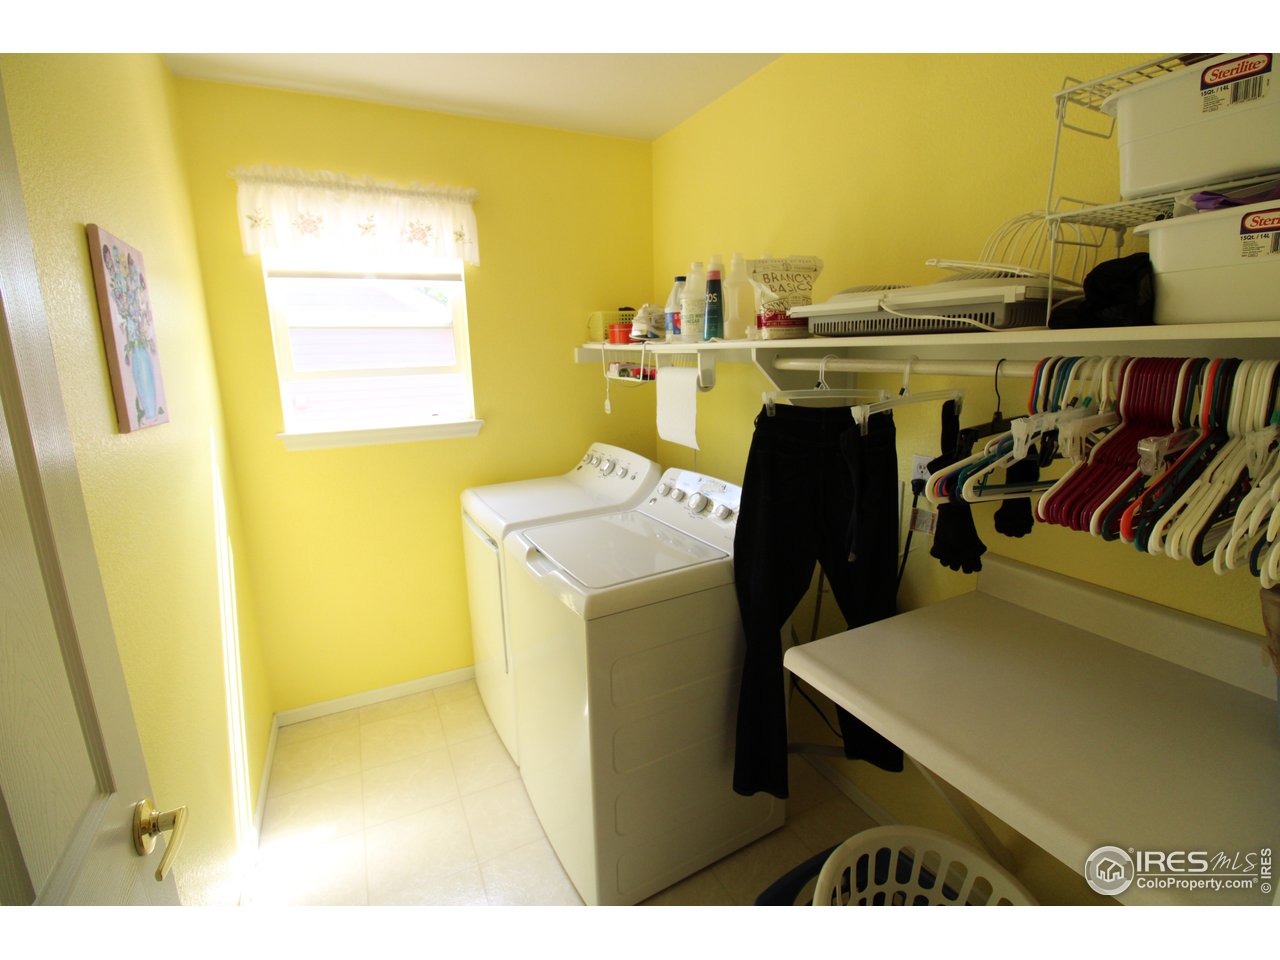 Upper level laundry room with folding table and space to hang clothes.